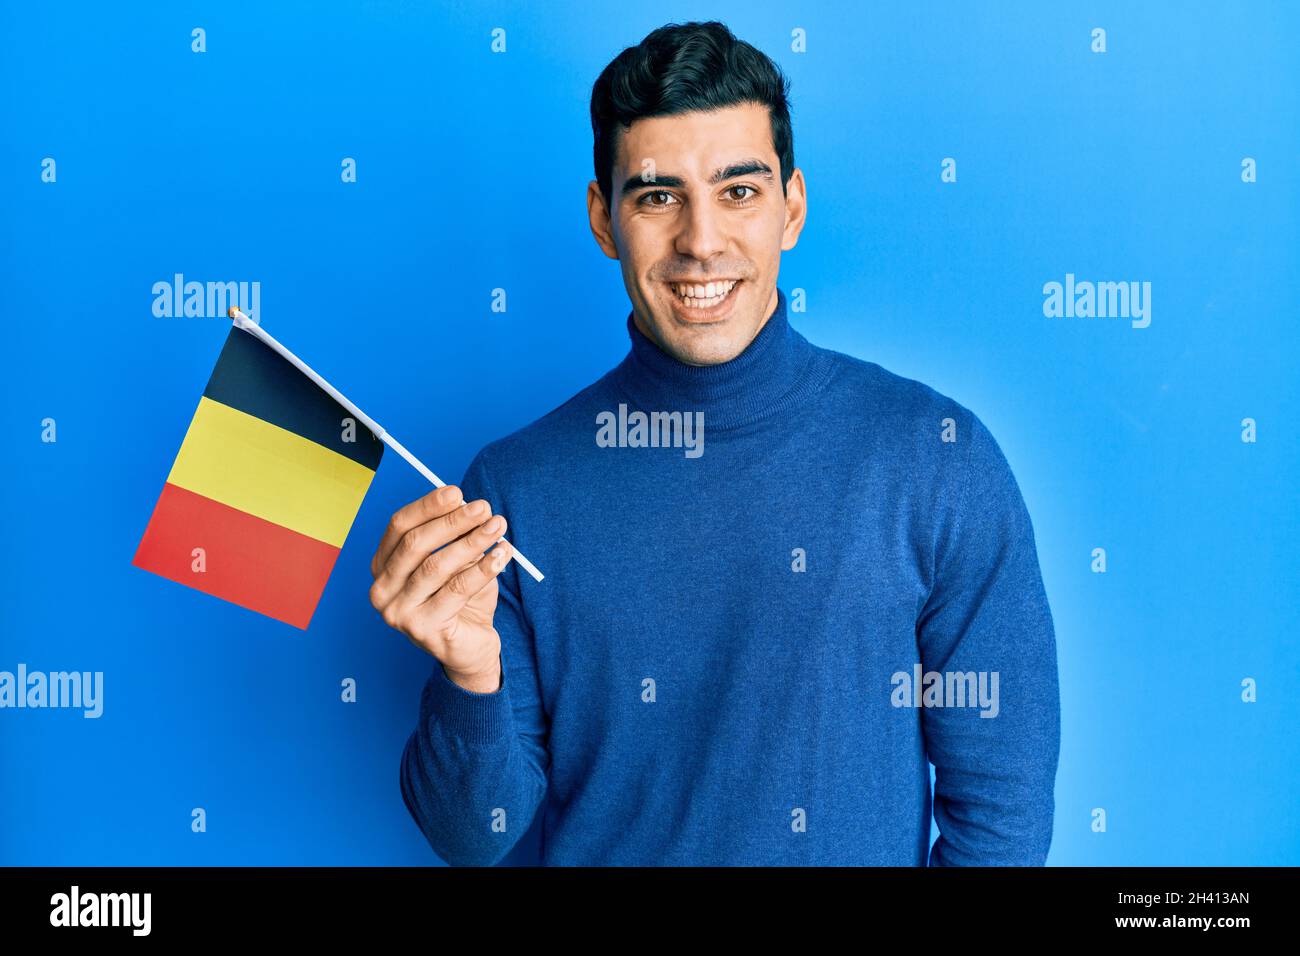 Handsome hispanic man holding belgium flag looking positive and happy standing and smiling with a confident smile showing teeth Stock Photo